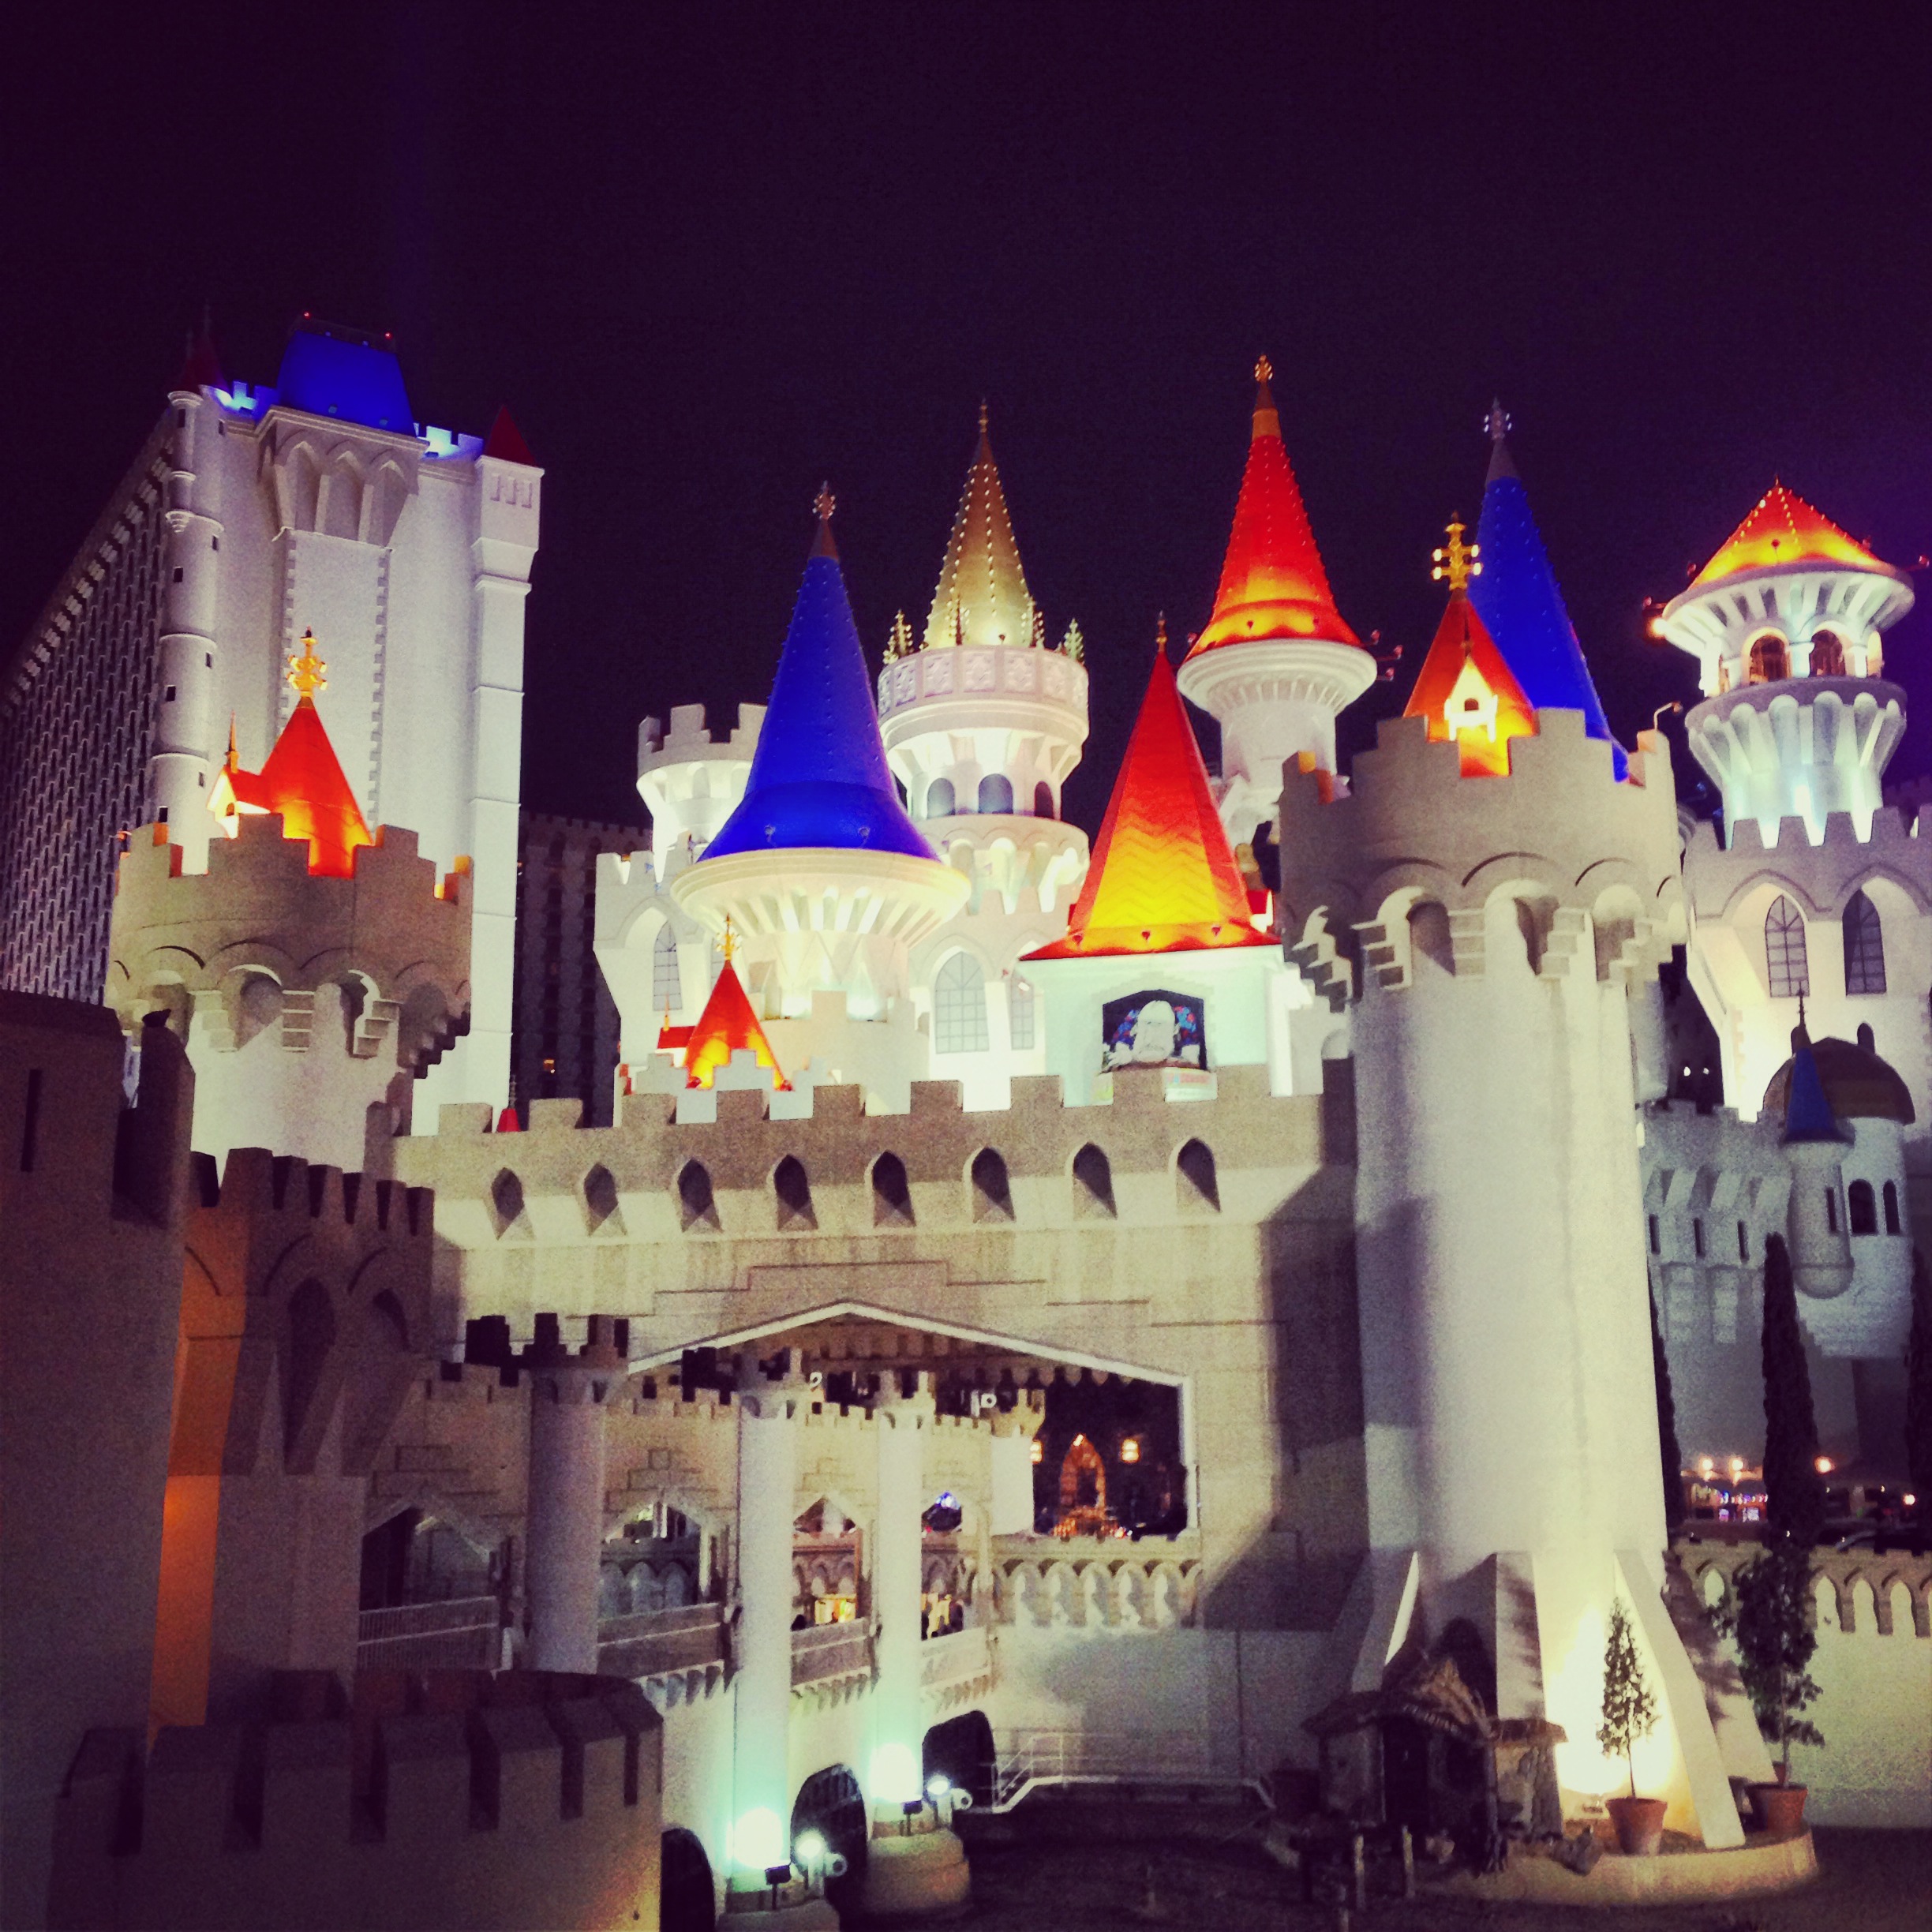 Hardly fit for a knight: Review of Excalibur Hotel and Casino in Las Vegas  - The Points Guy